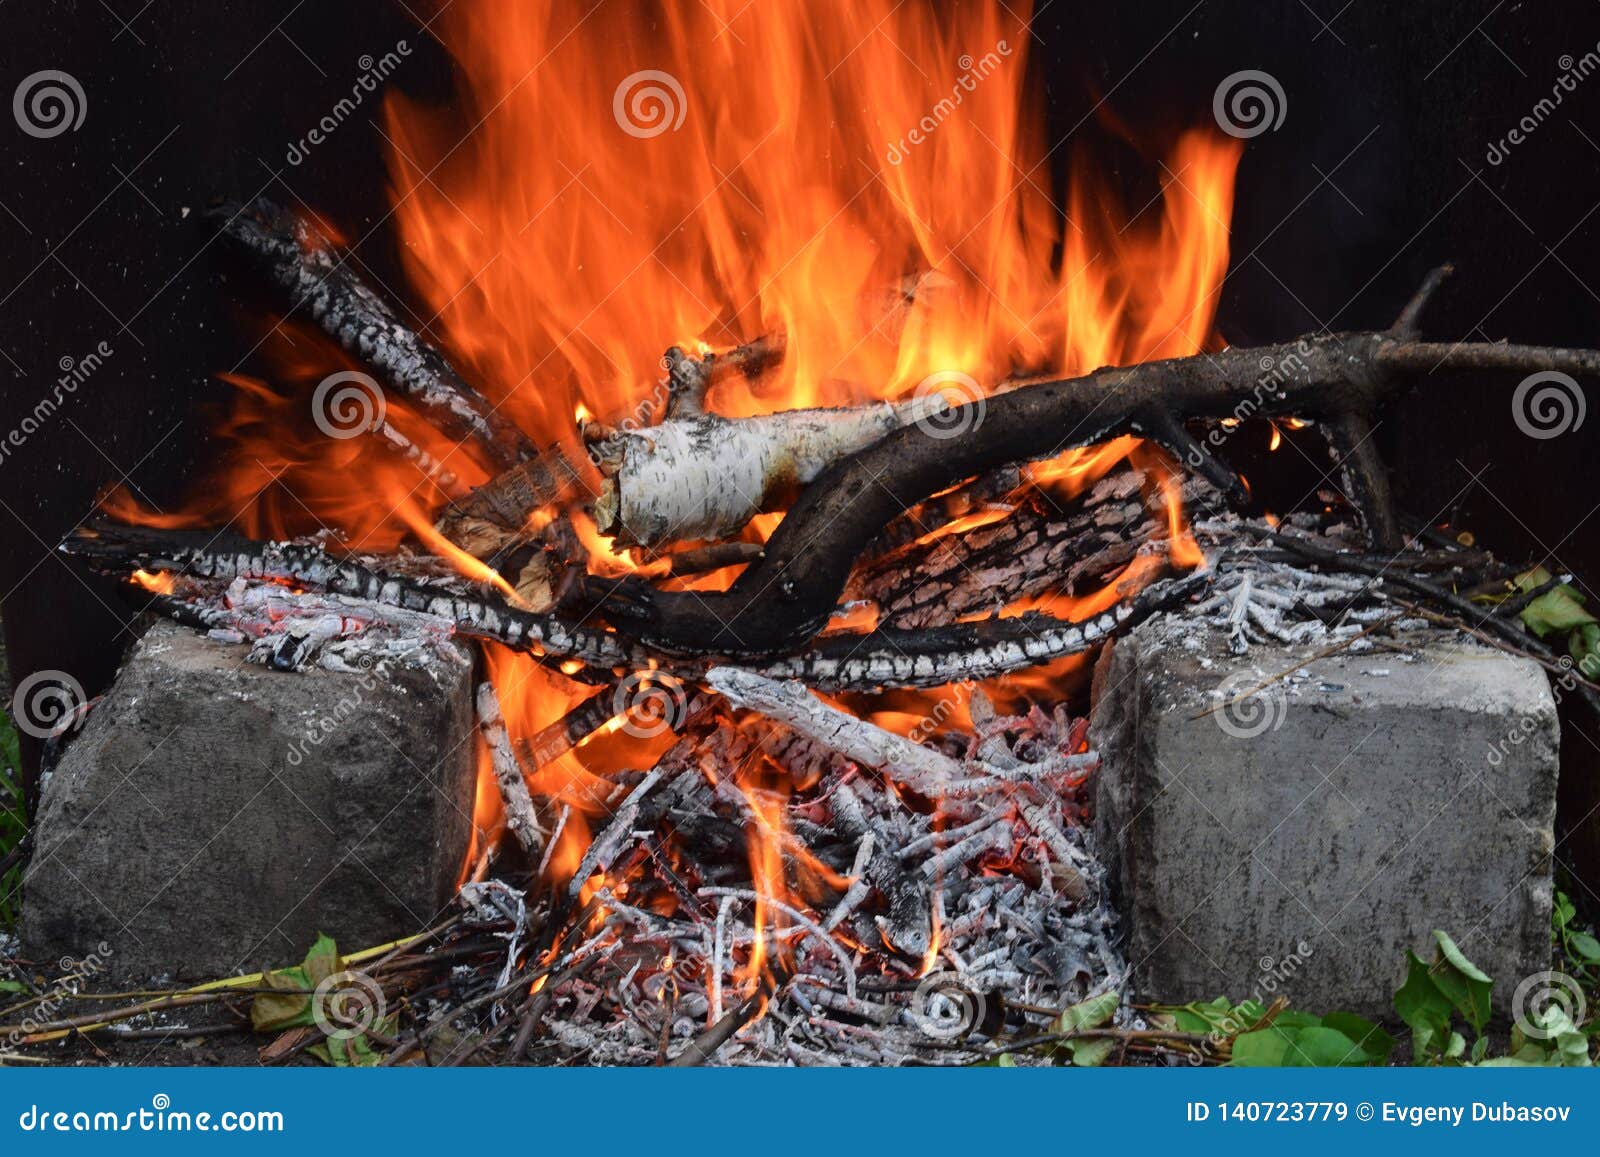 Bonfire between Two Stones at Camp in Summer Stock Image - Image of ...